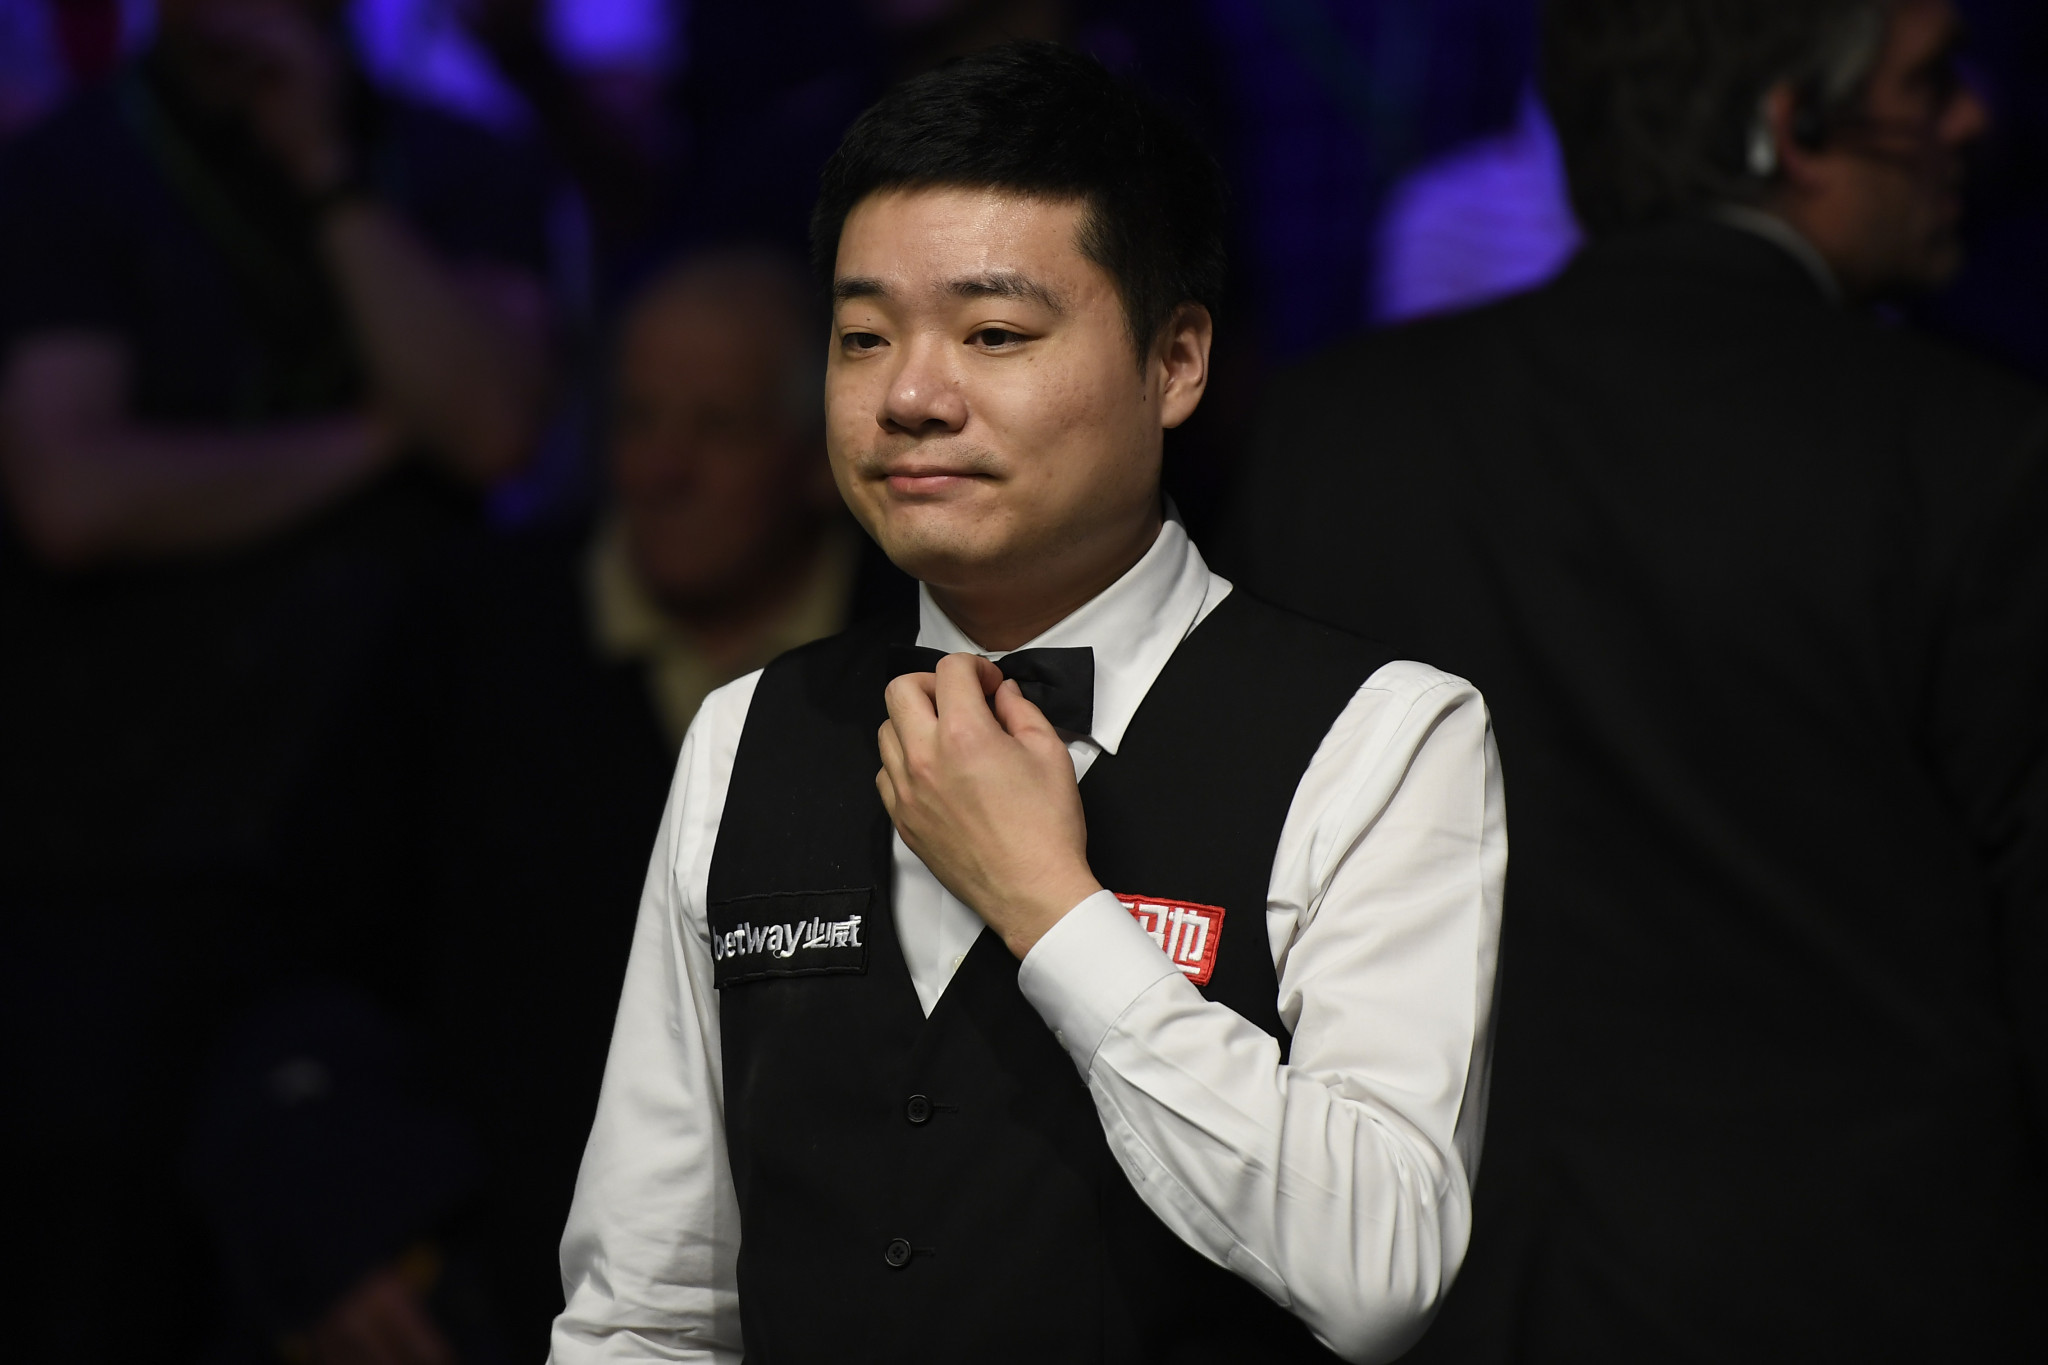 Ding triumphs in decider while two more former champions record wins on day two of World Snooker Championship